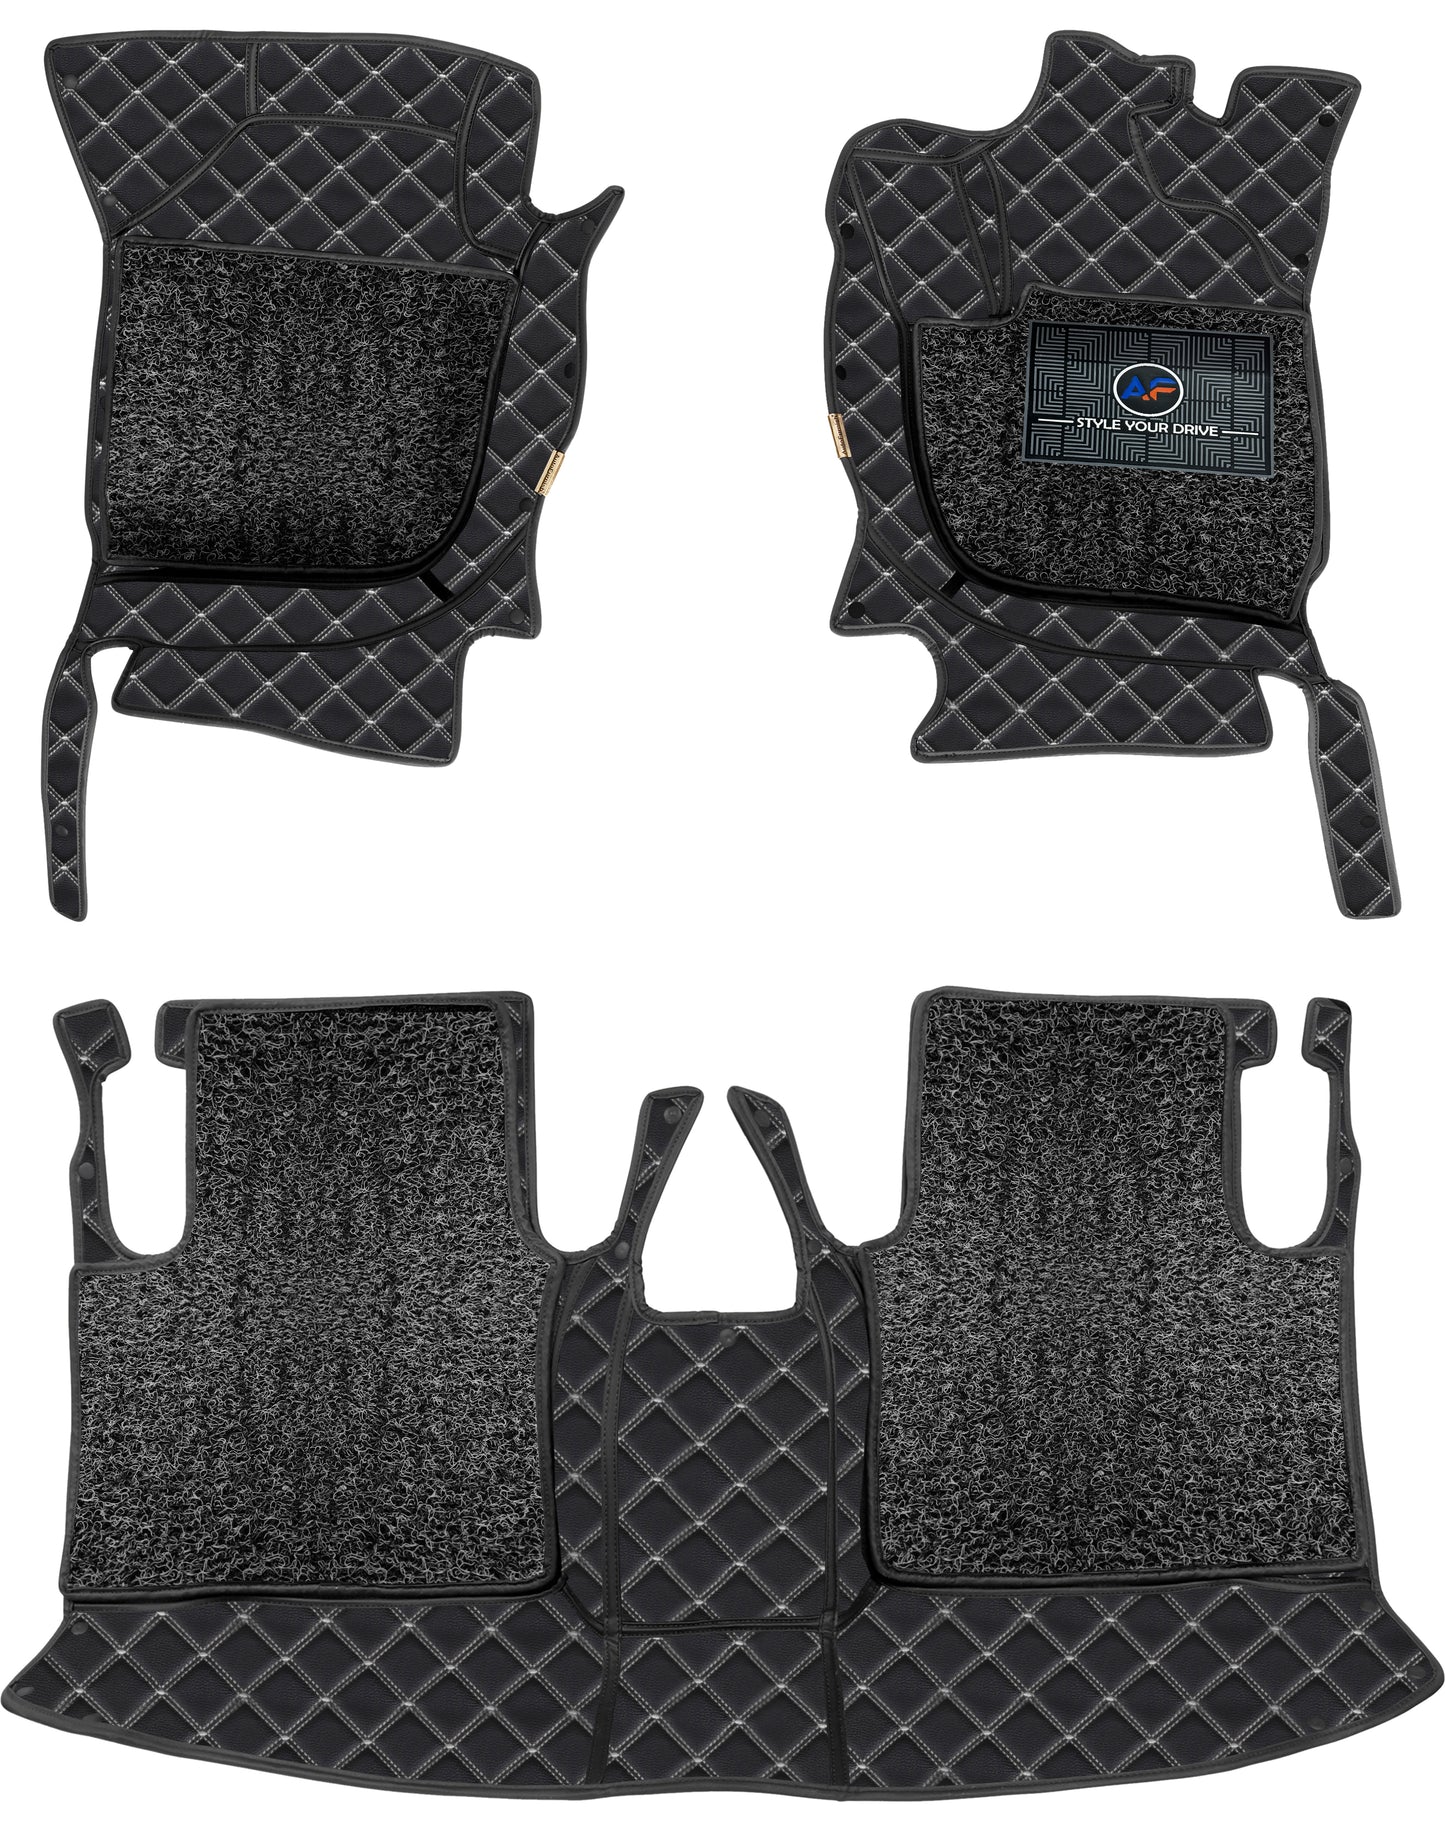 Mahindra Scorpio Classic 2023-7D Luxury Car Mat, All Weather Proof, Anti-Skid, 100% Waterproof & Odorless with Unique Diamond Fish Design (24mm Luxury PU Leather, 2 Rows)